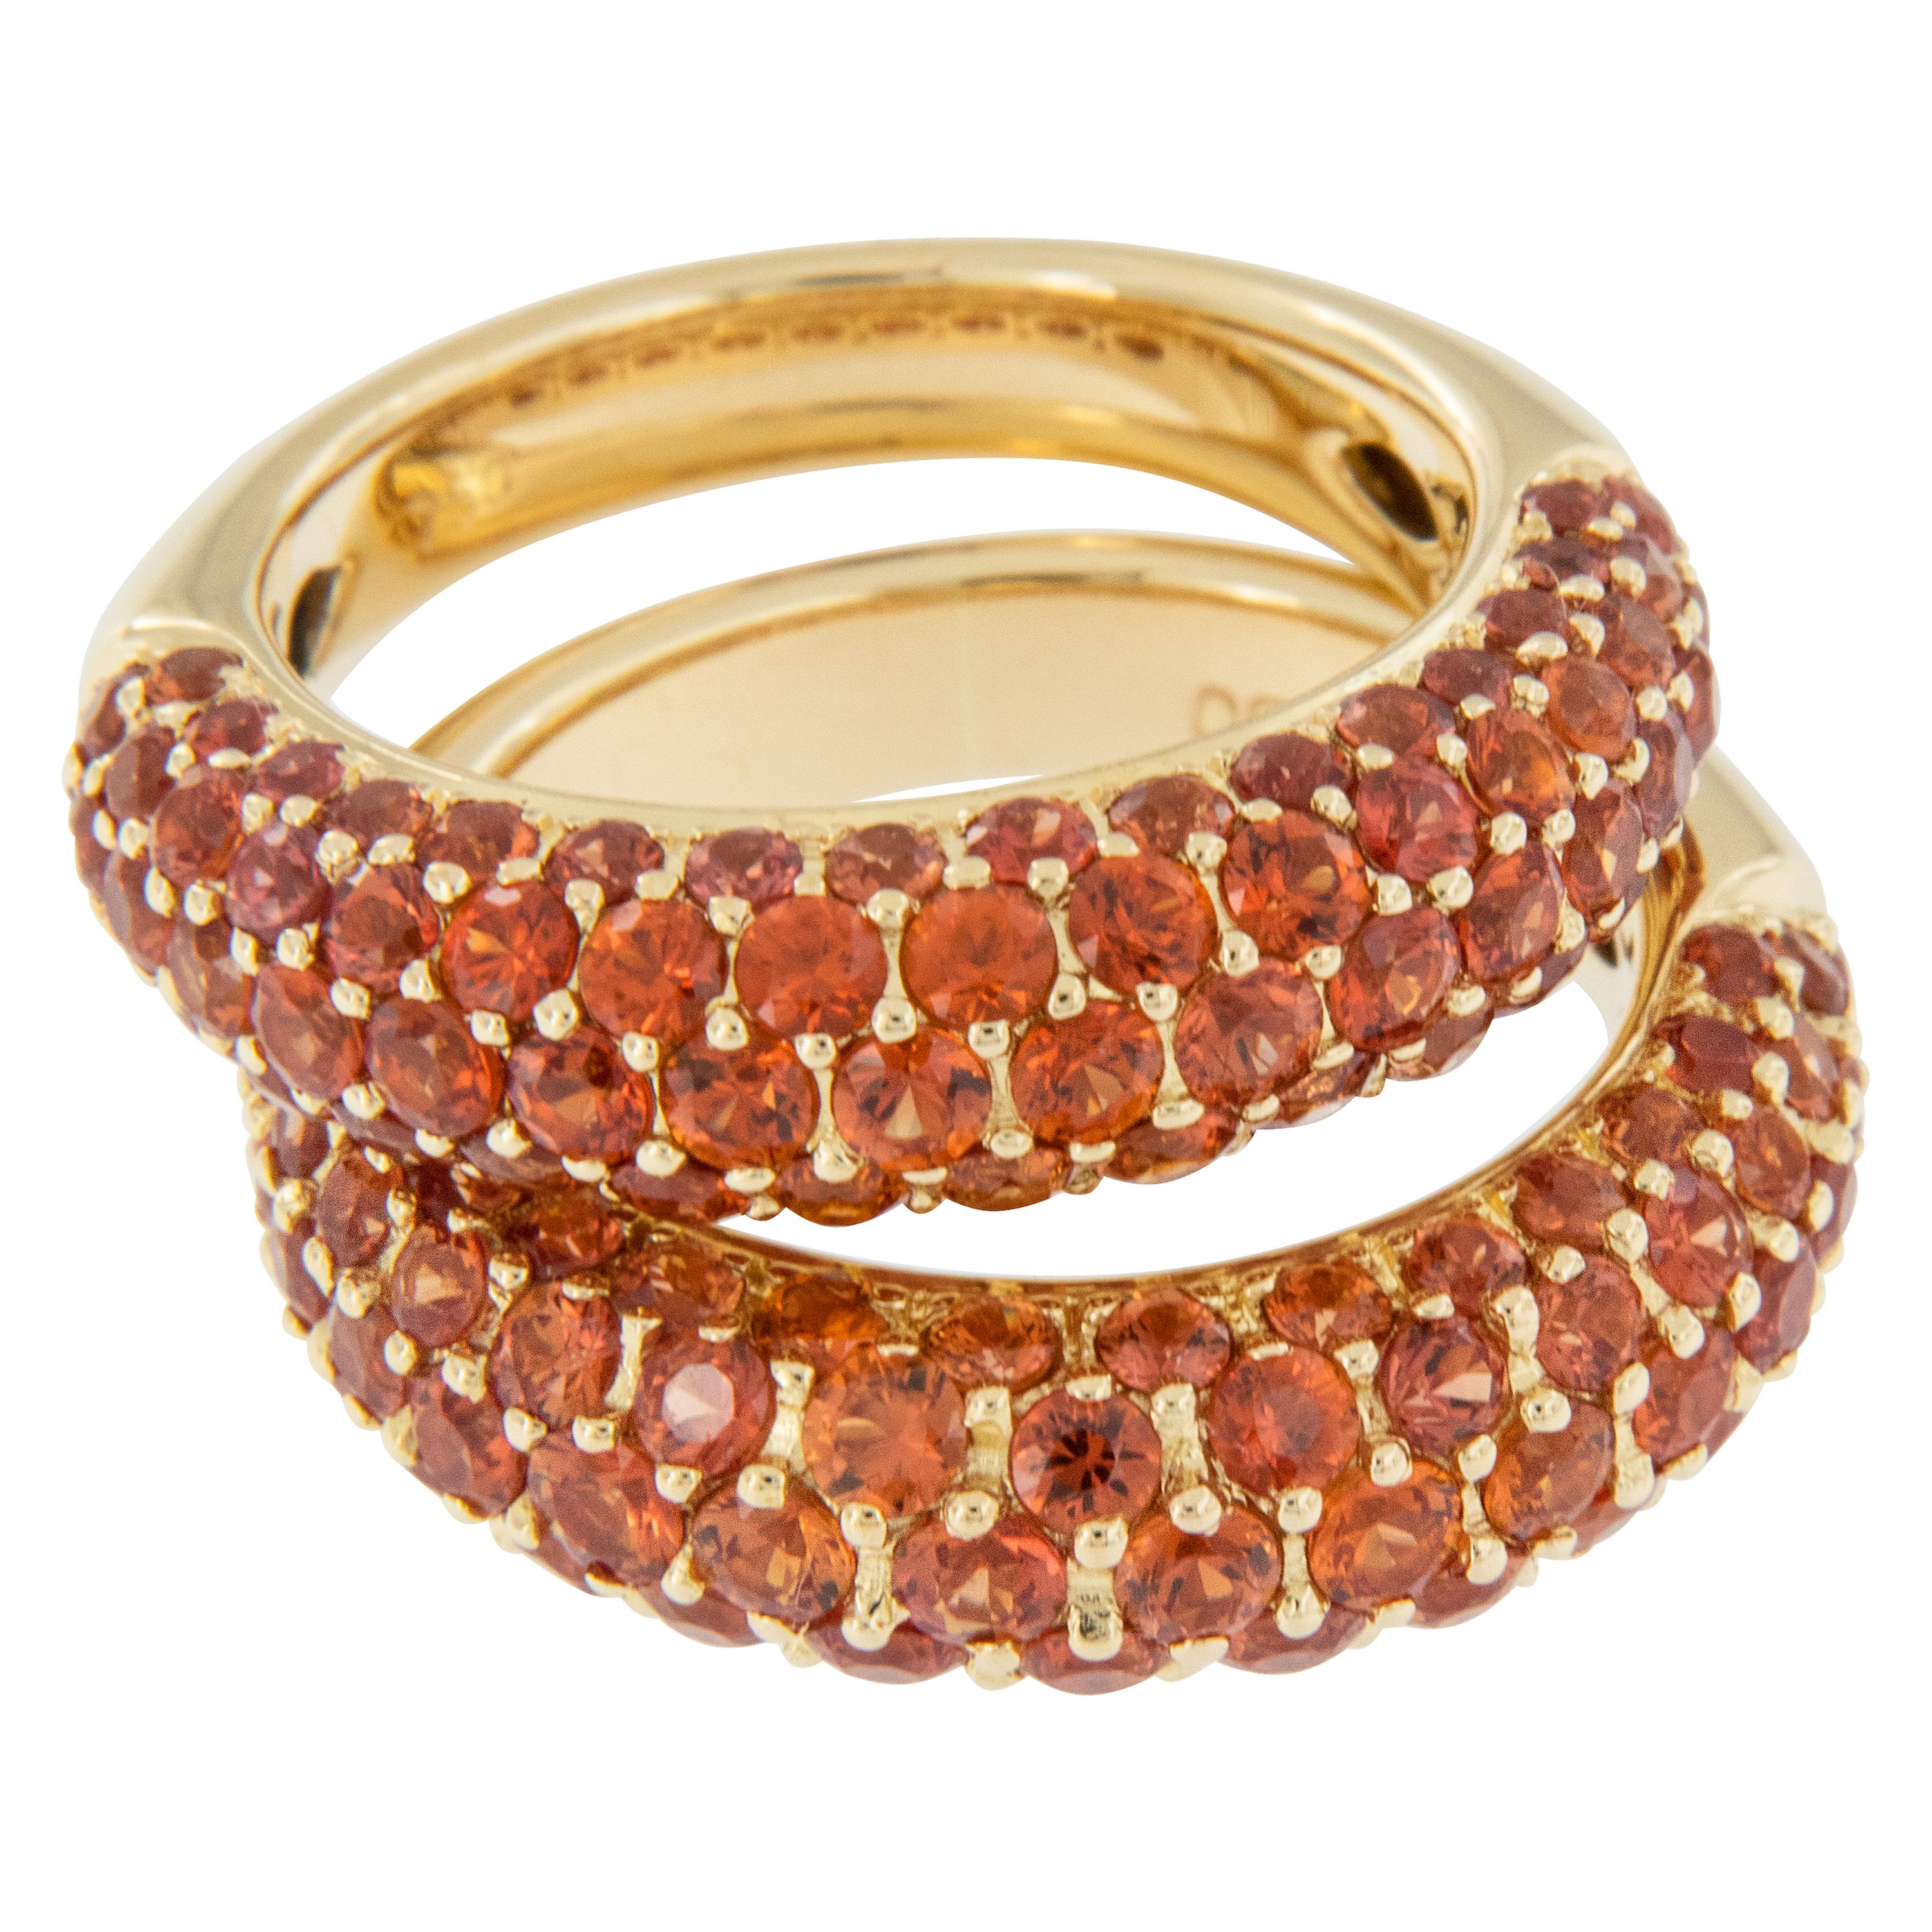 Classic describes this Fancy Orange Sapphire ring! Orange is one of the more rare colors of fancy sapphires and it is obtained by trace elements. Created in 18 karat yellow gold, this Bombe' style band ring contains 84 orange sapphires bead set =